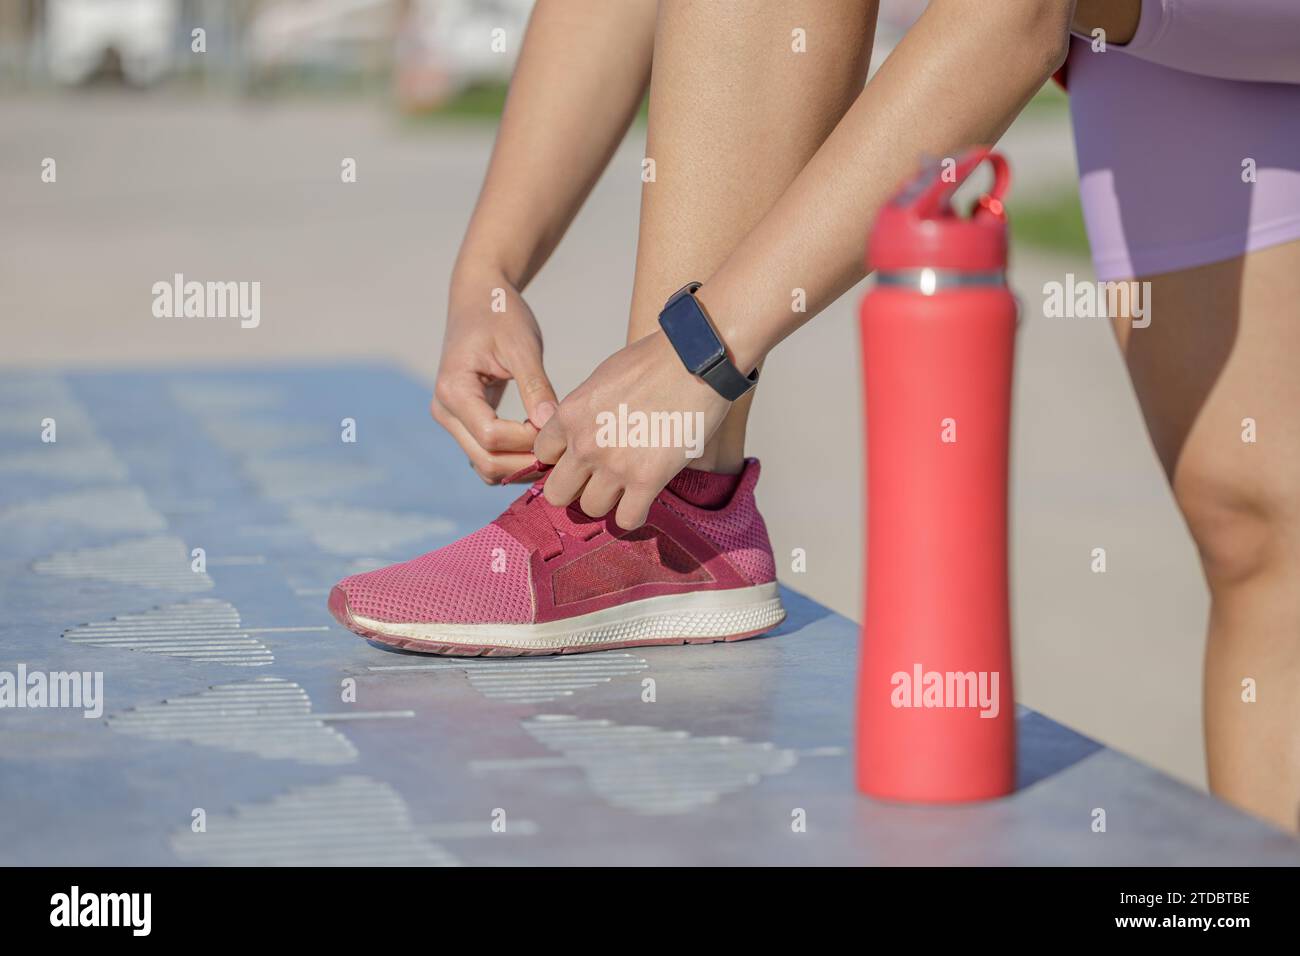 Detail of a girl's feet tying the laces of her sneaker. Stock Photo